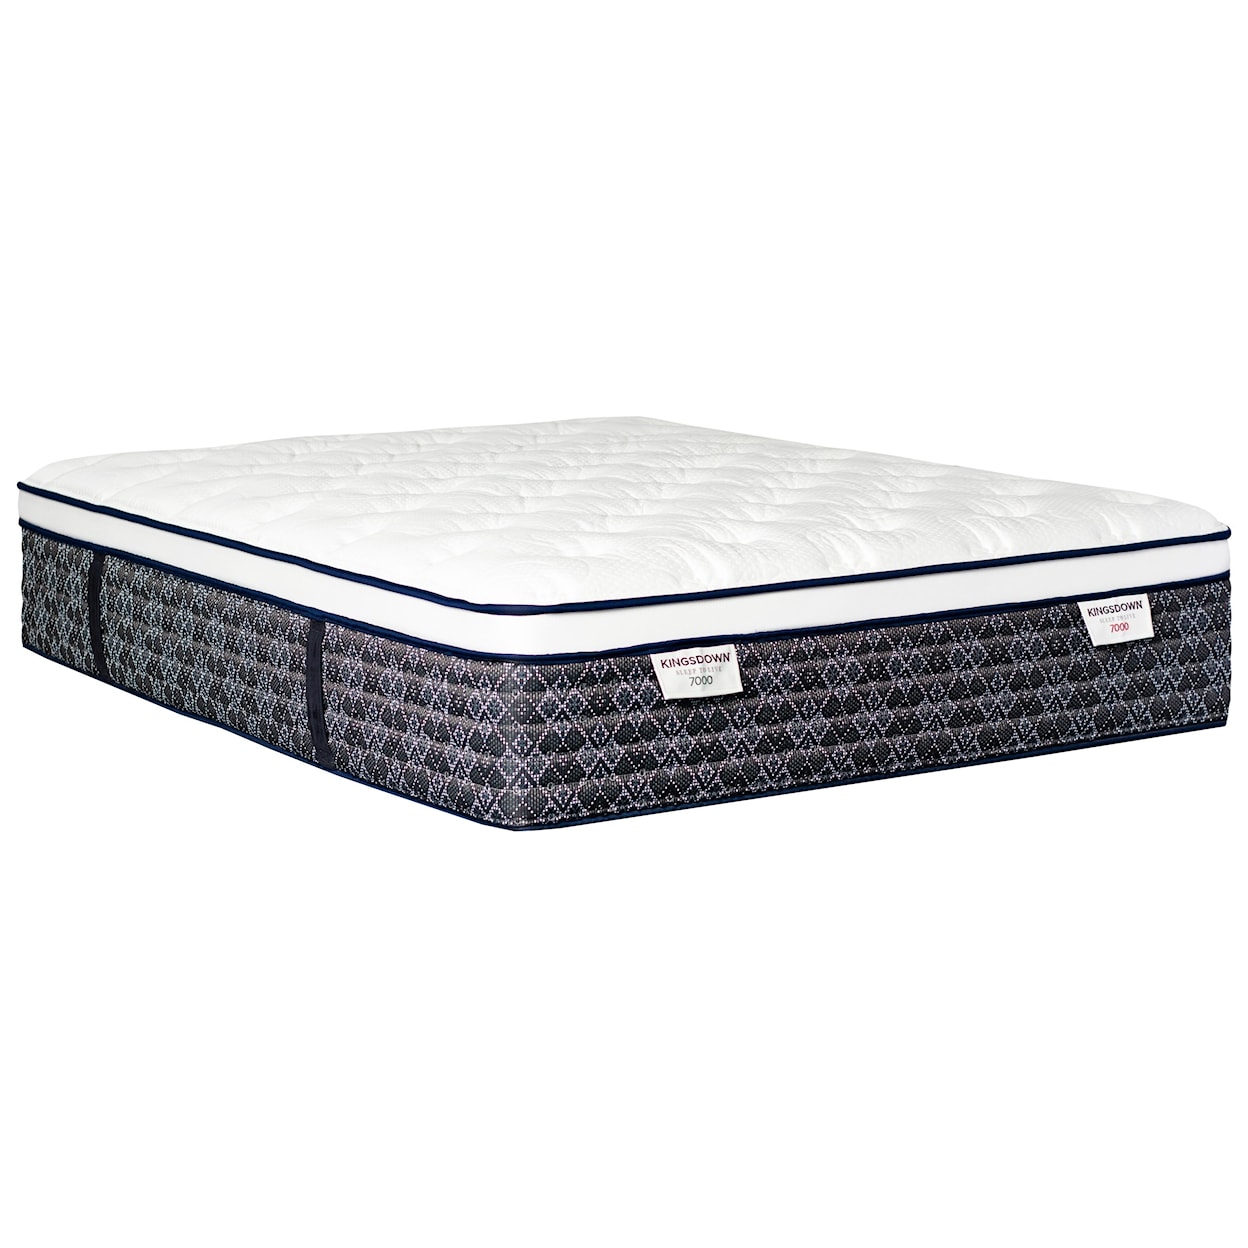 Kingsdown Sleep to Live 7000 Green Red ET Twin Pocketed Coil Mattress